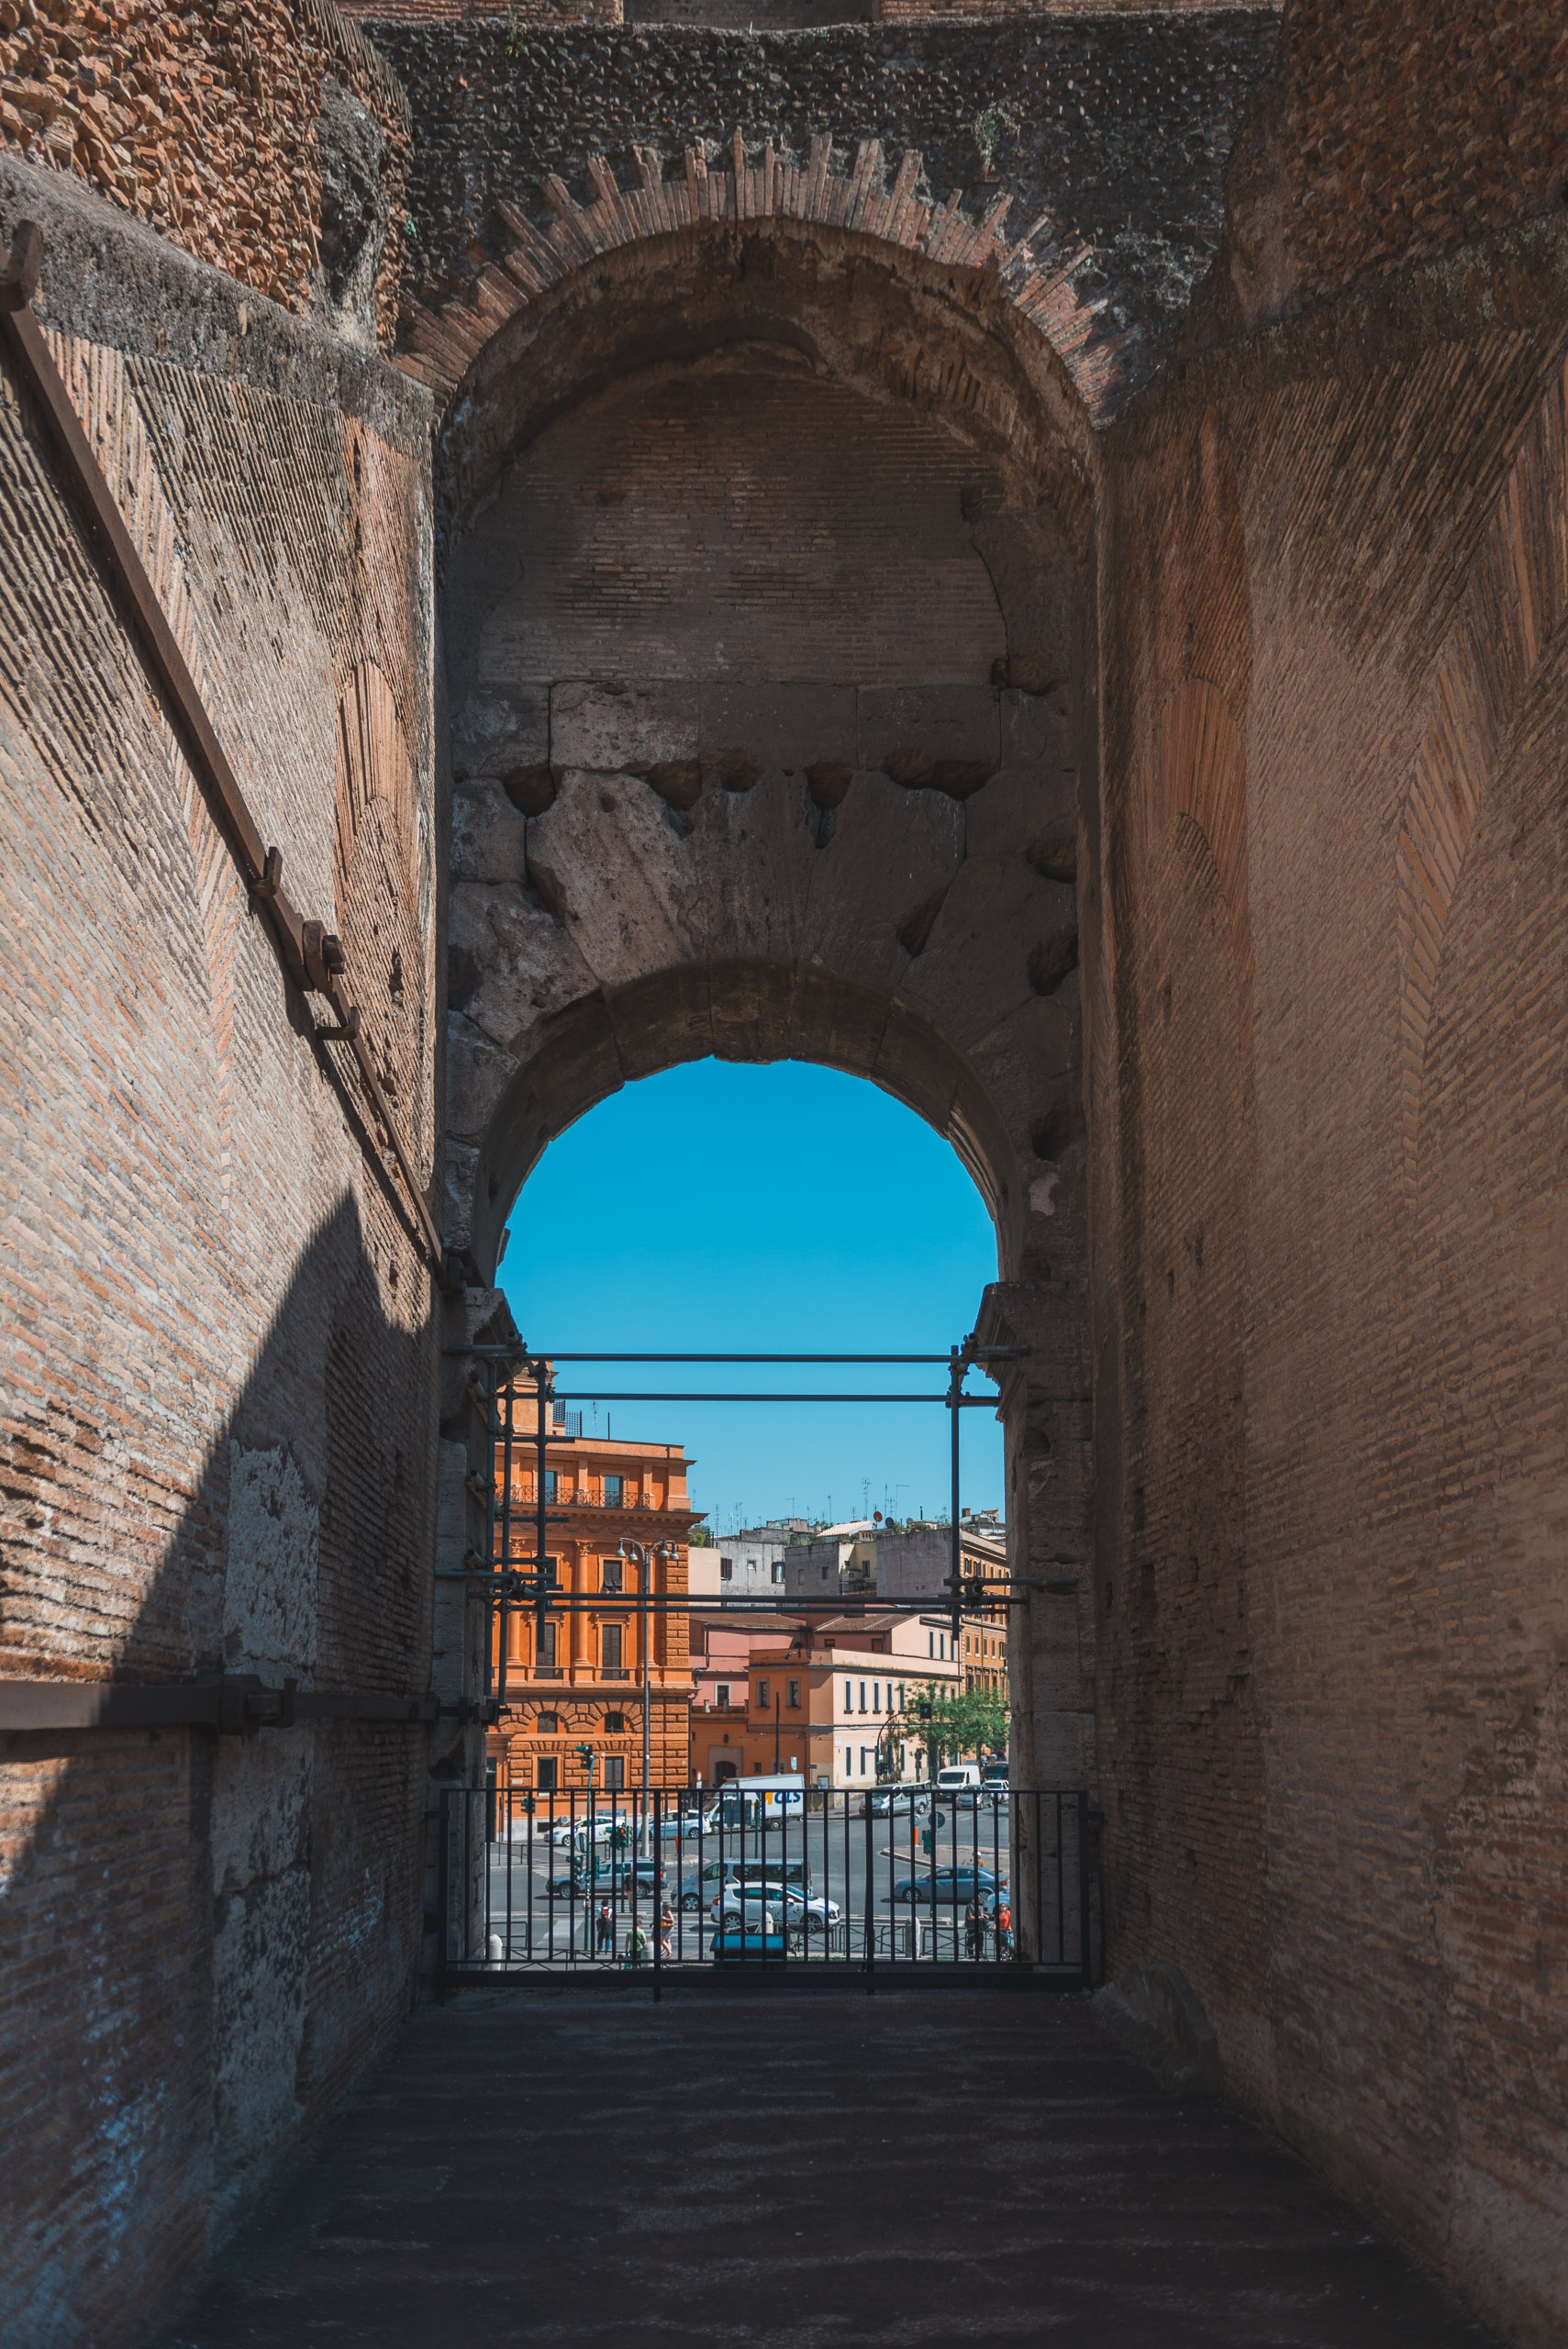 An Ancient Entrance to the Colosseum